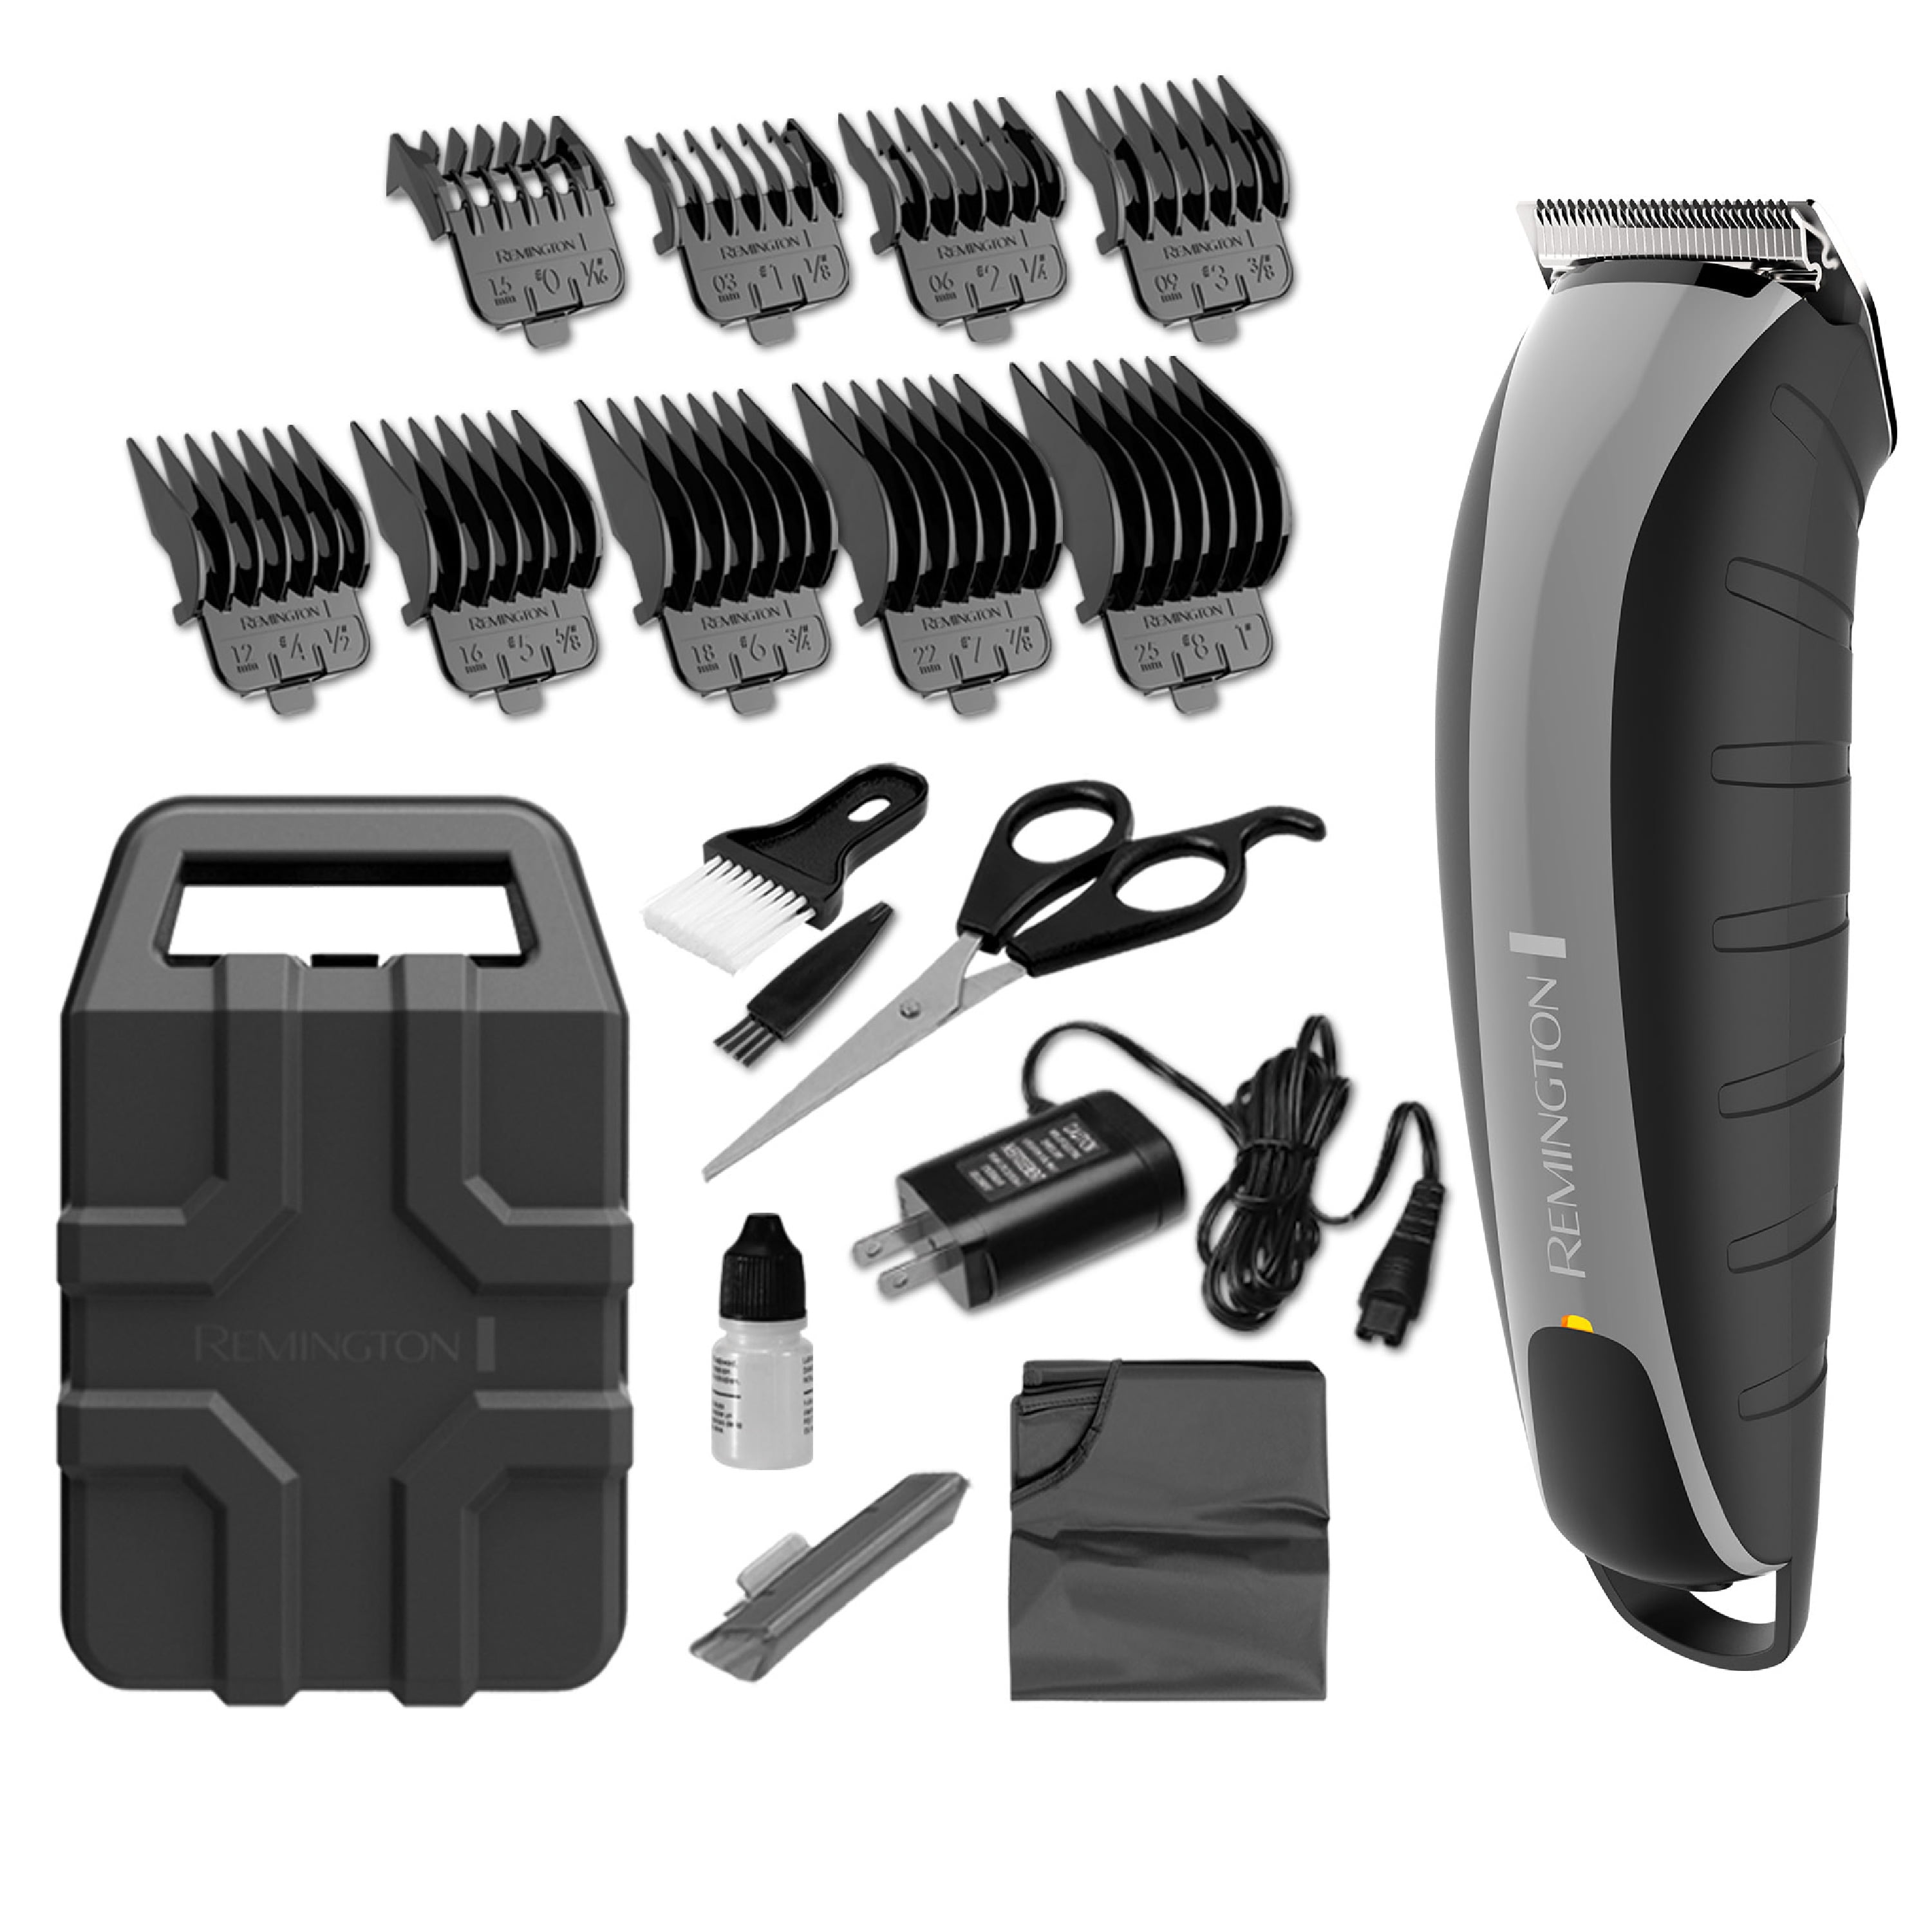 gents hair clippers amazon